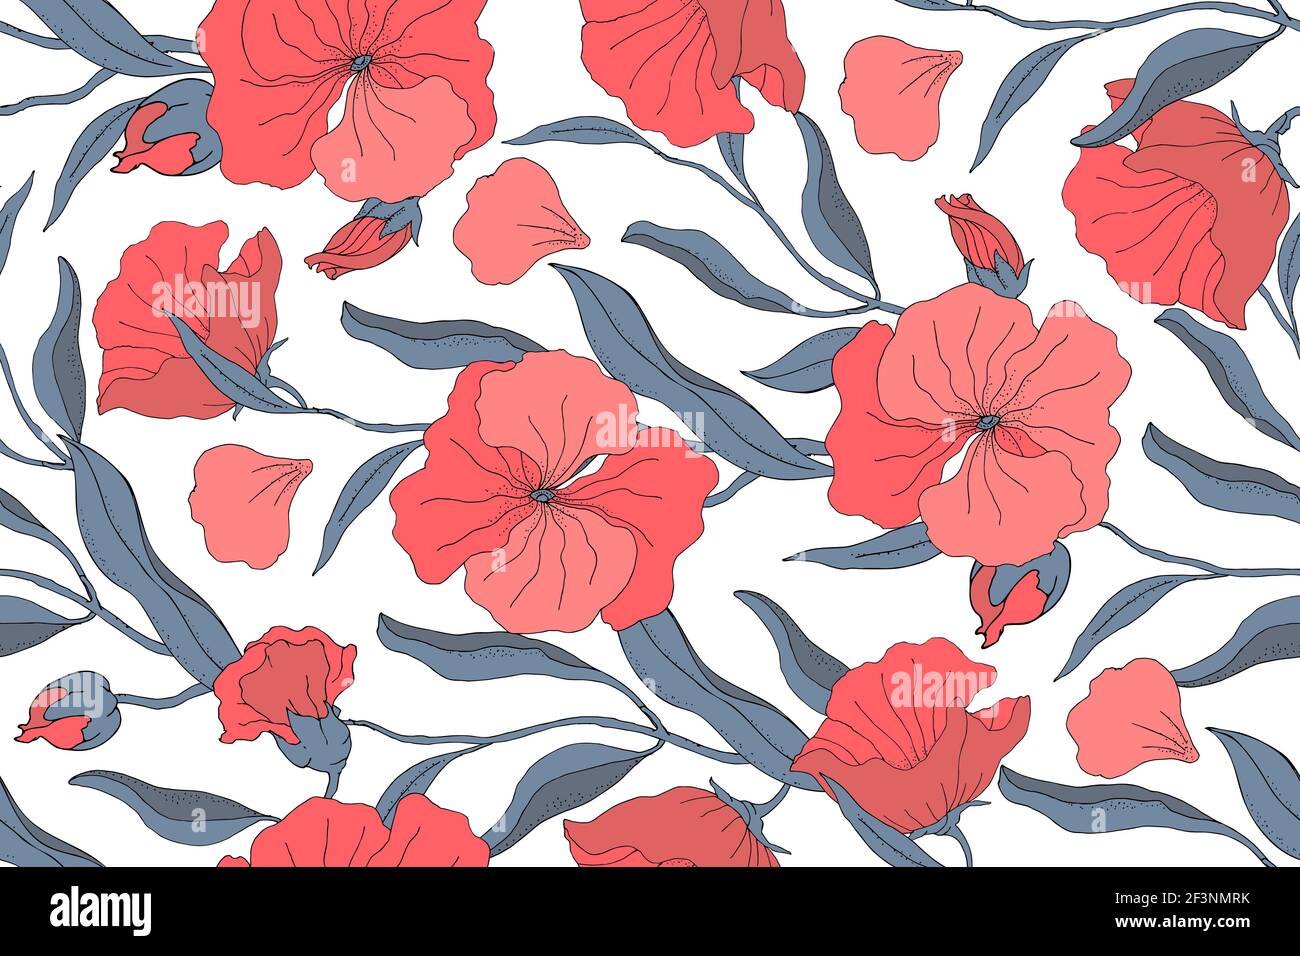 Art floral vector seamless pattern. Red flowers, buds with blue branches, leaves and petals Stock Vector